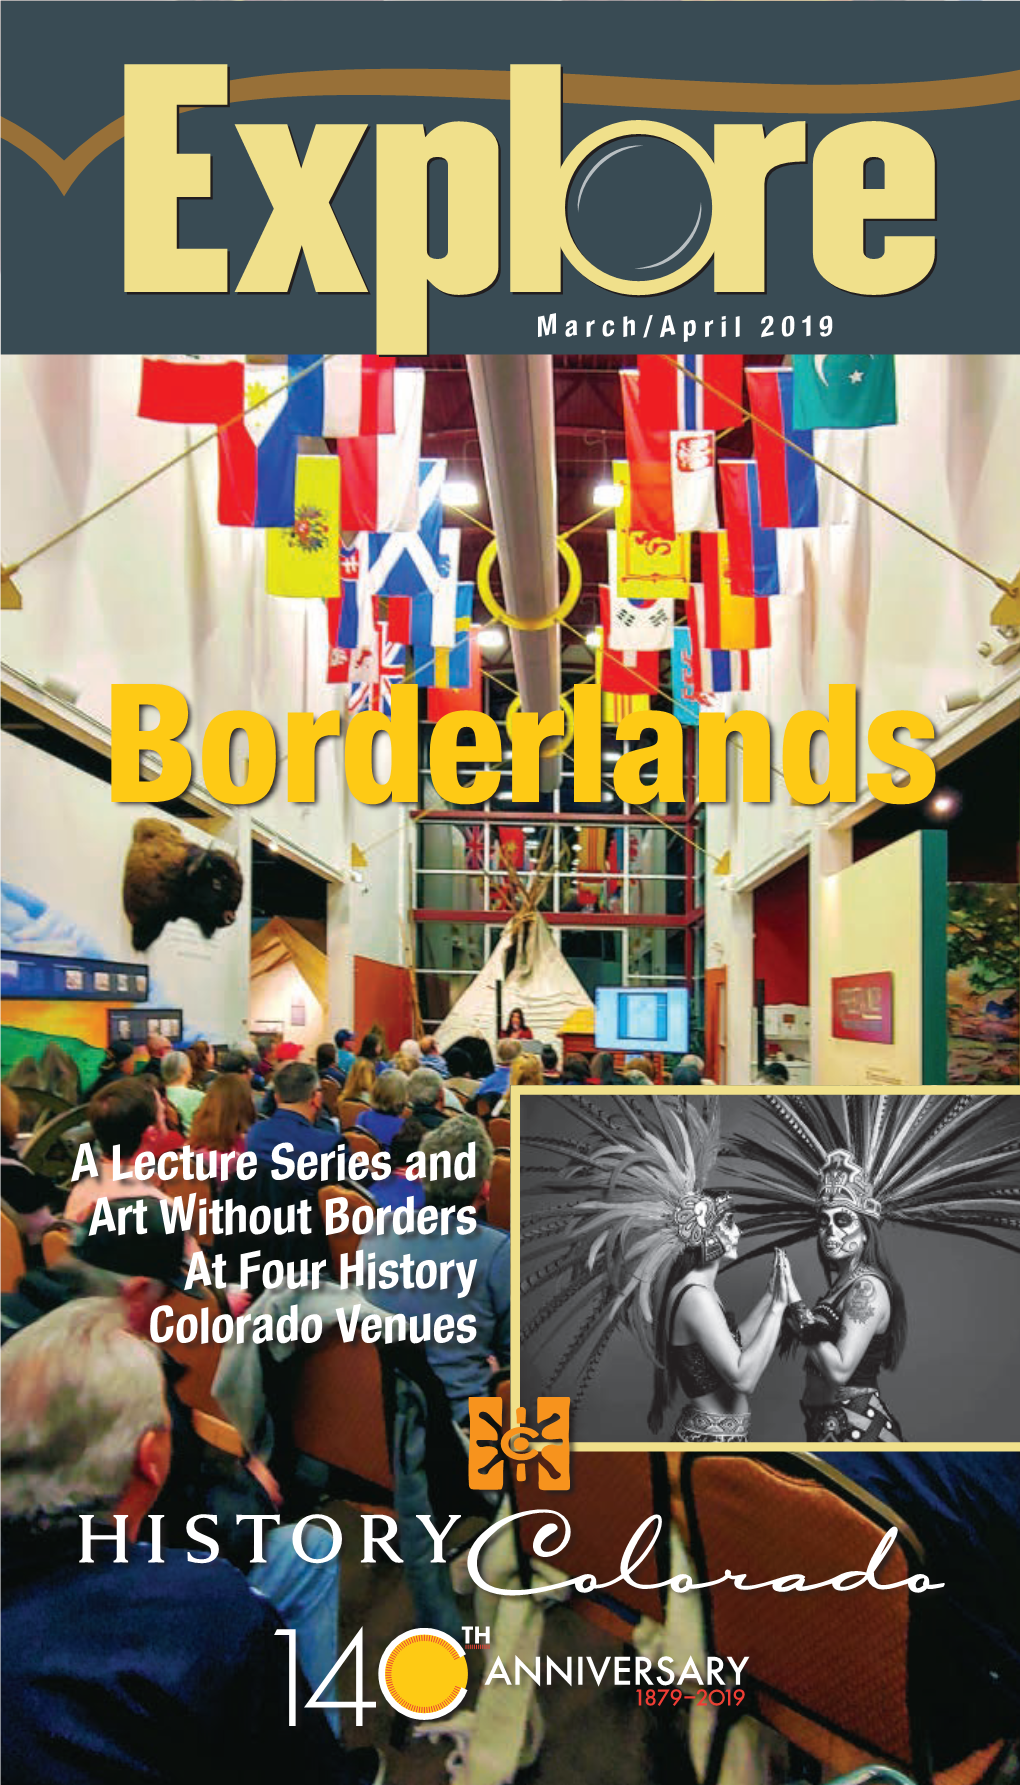 A Lecture Series and Art Without Borders at Four History Colorado